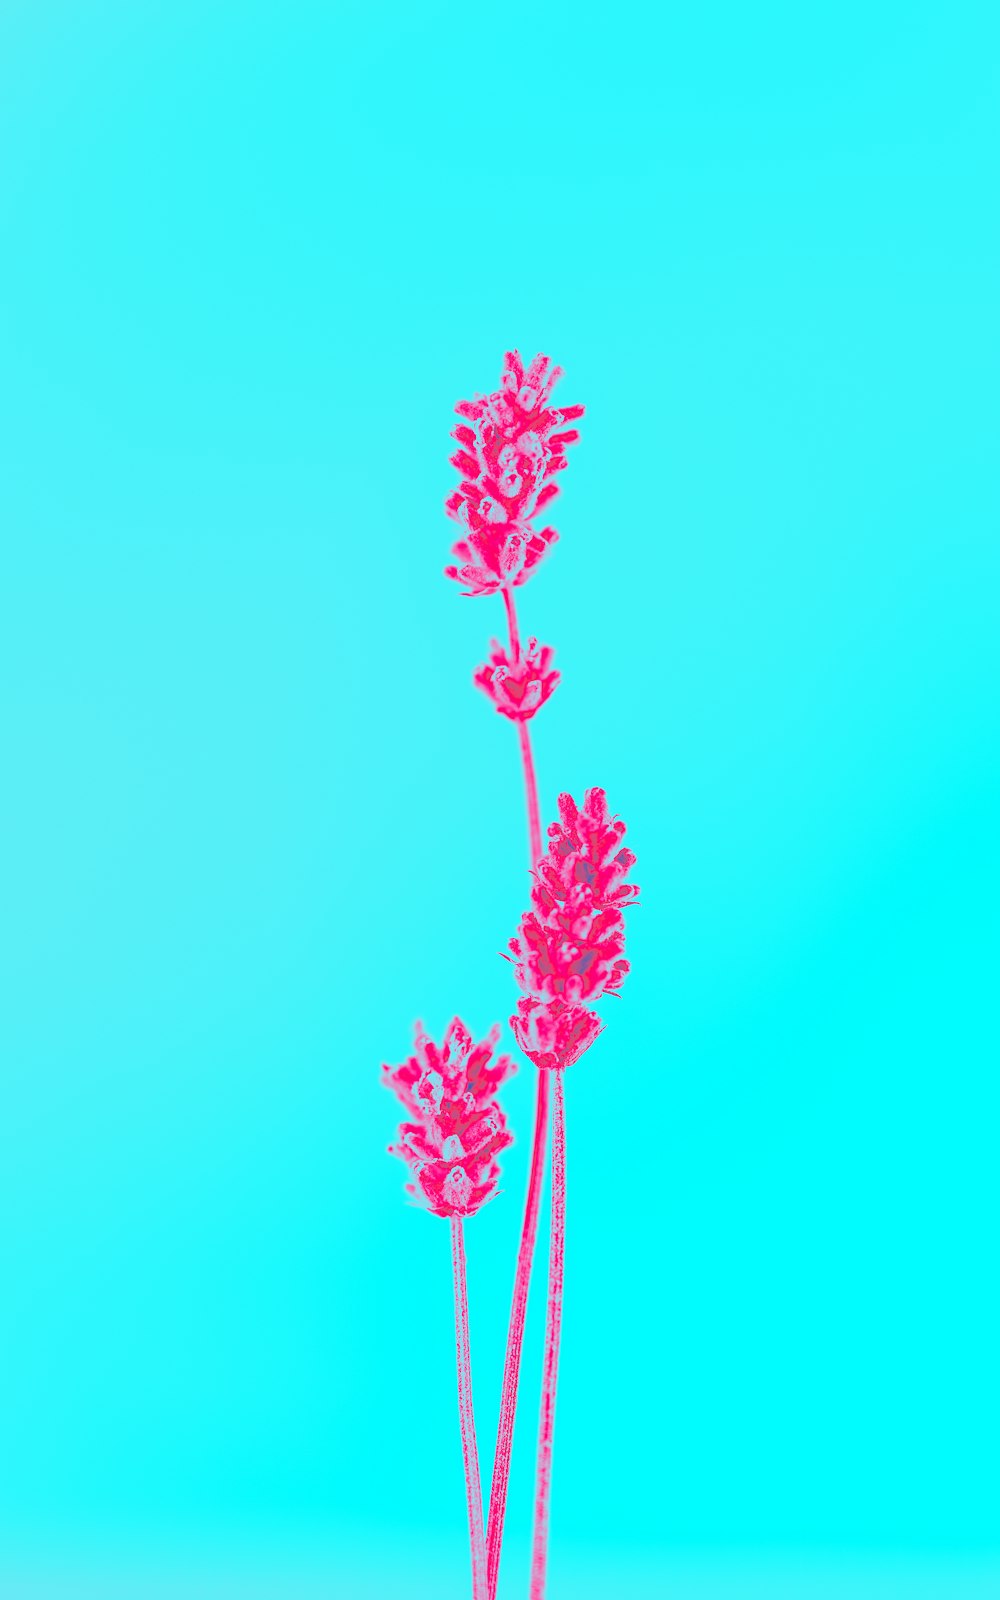 three pink flowers on a blue background